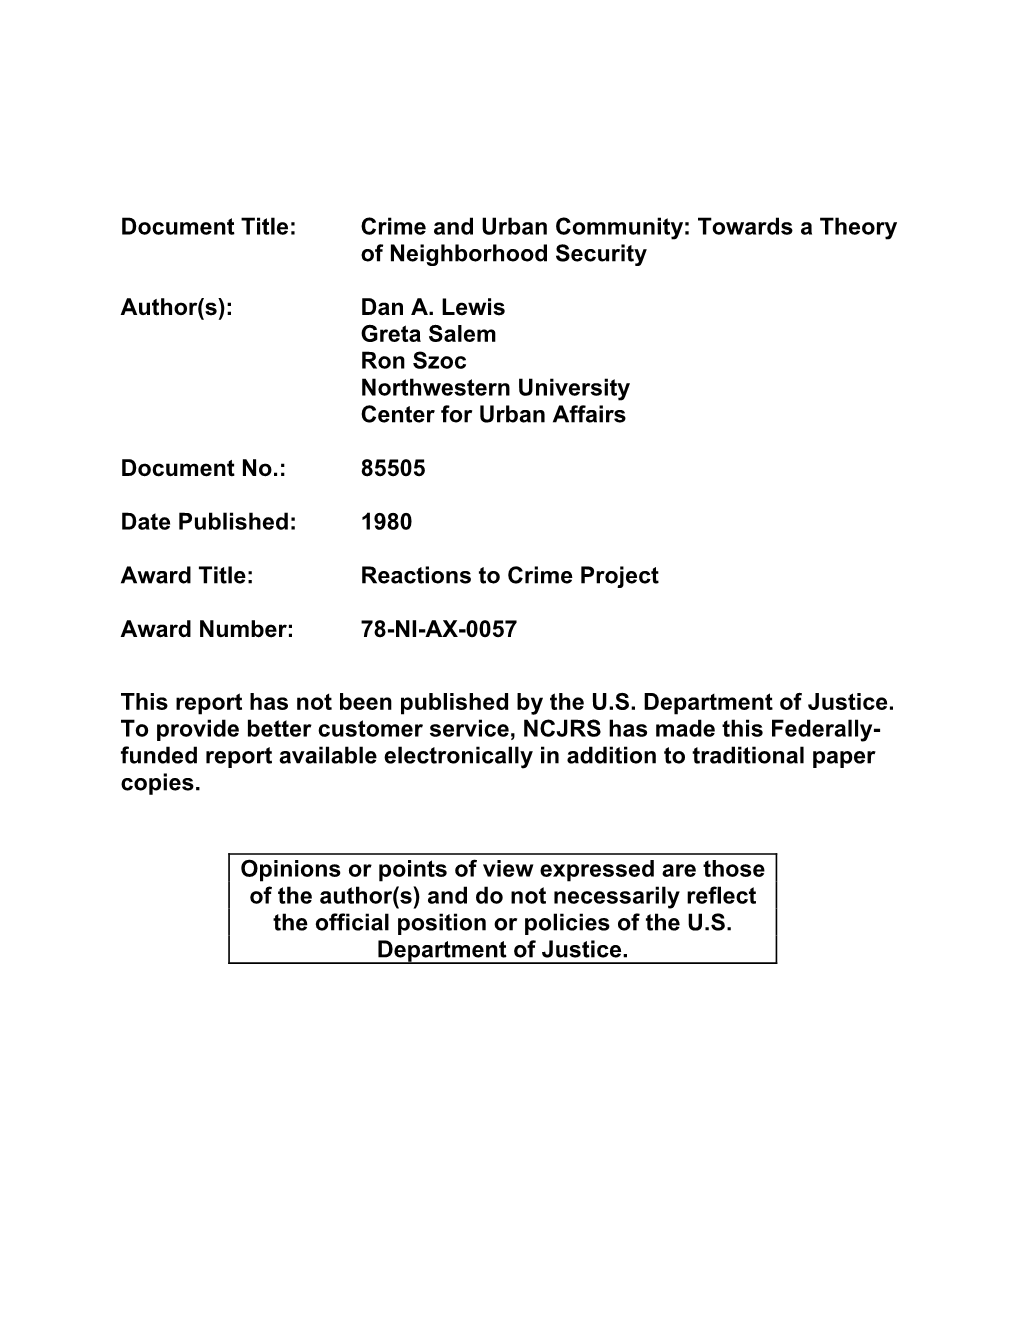 Volume III Crime and Urban Community: Towards a Theory Of